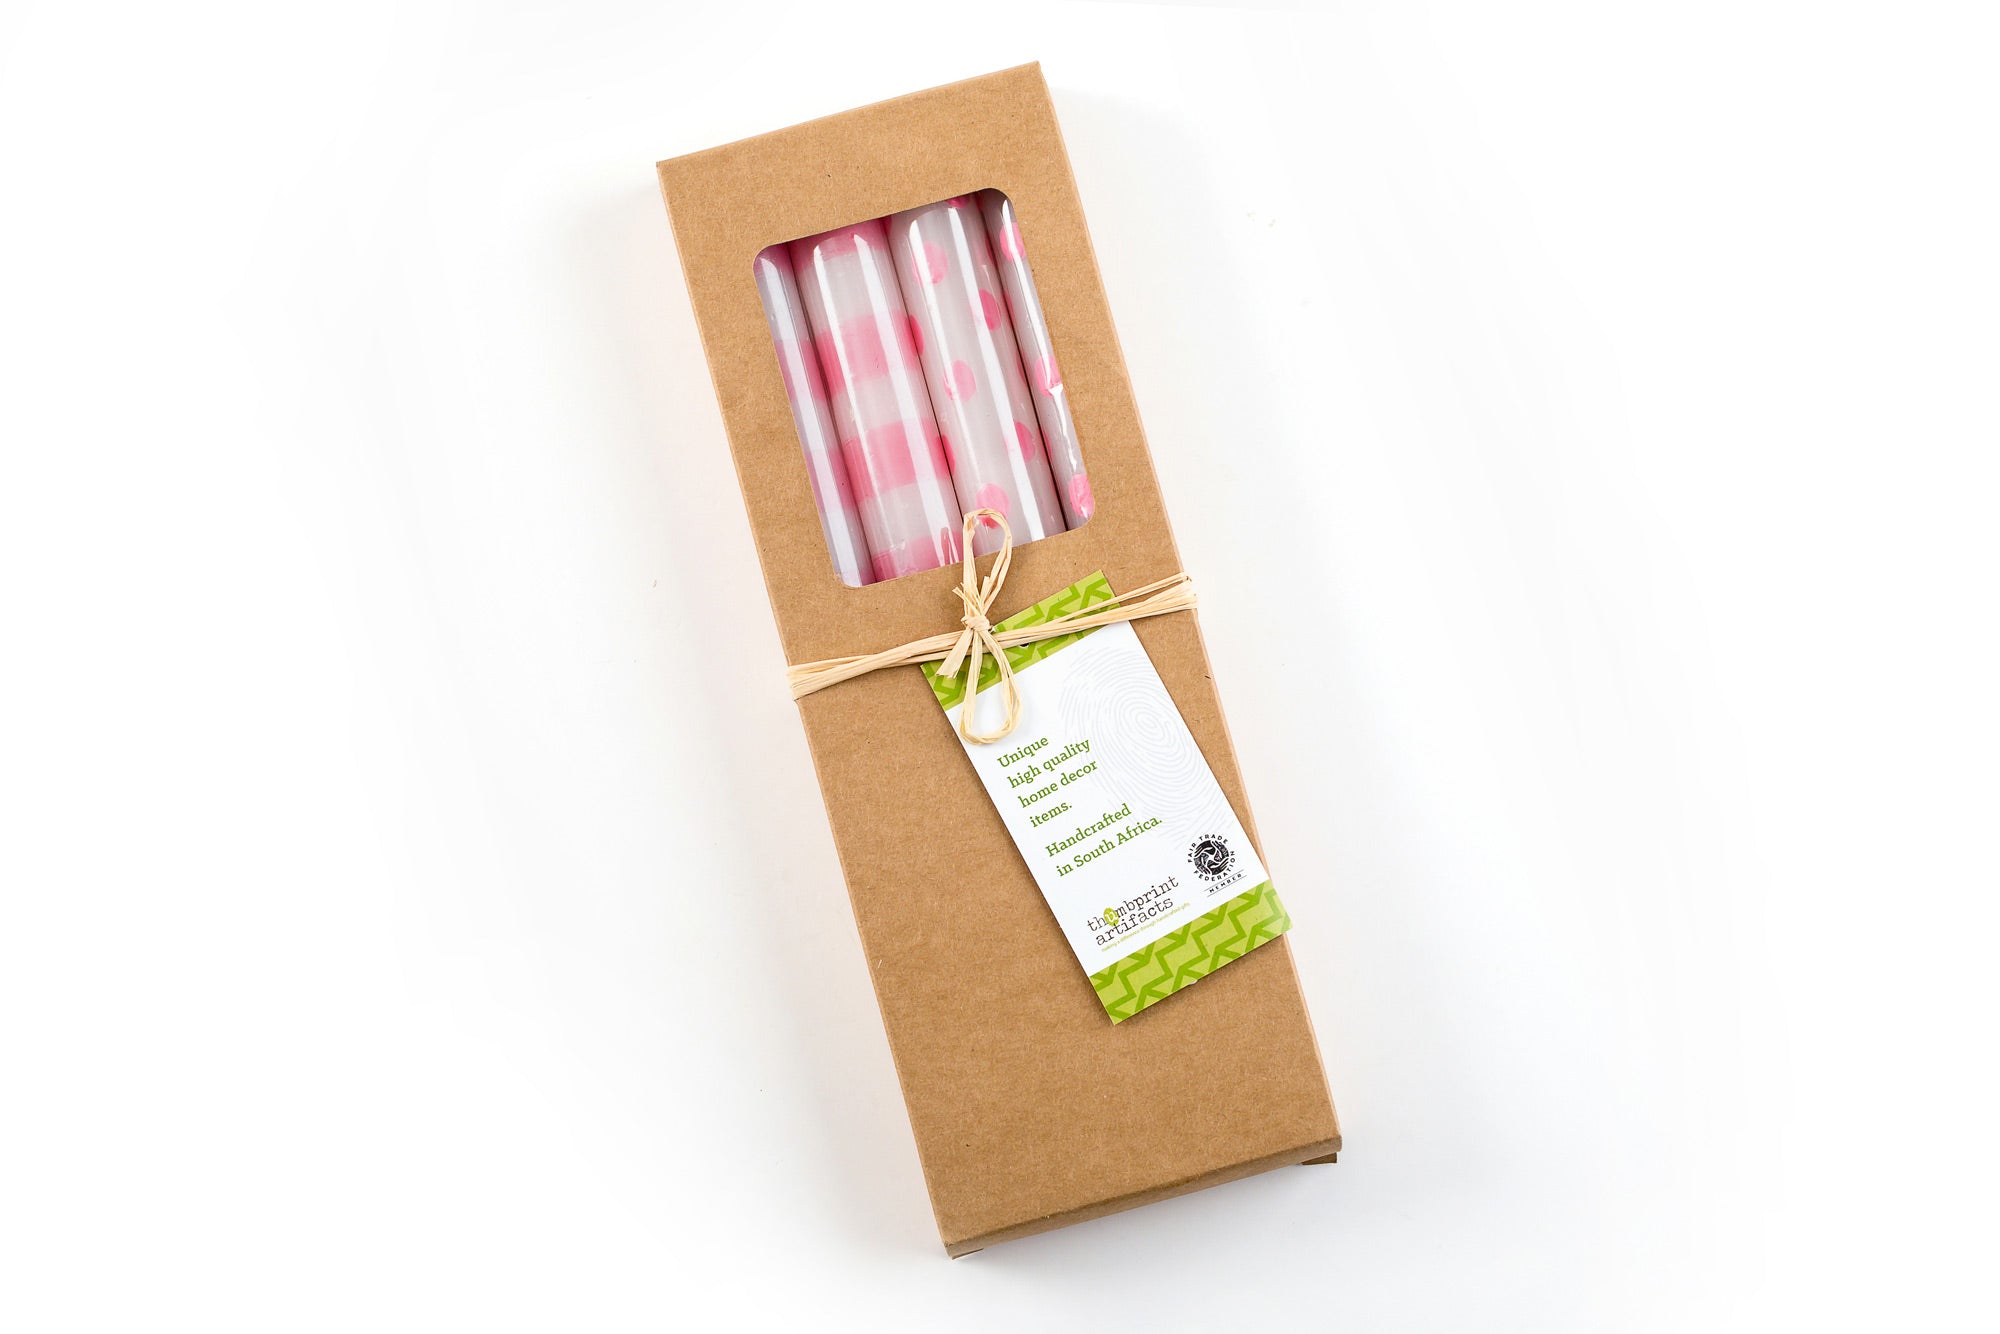 4 taper candles in a kraft paper gift box; two are white taper candles with pink stripes. and two are white candles with pink dots. The box is tied with a story card.  Lovely gift & Fair Trade.